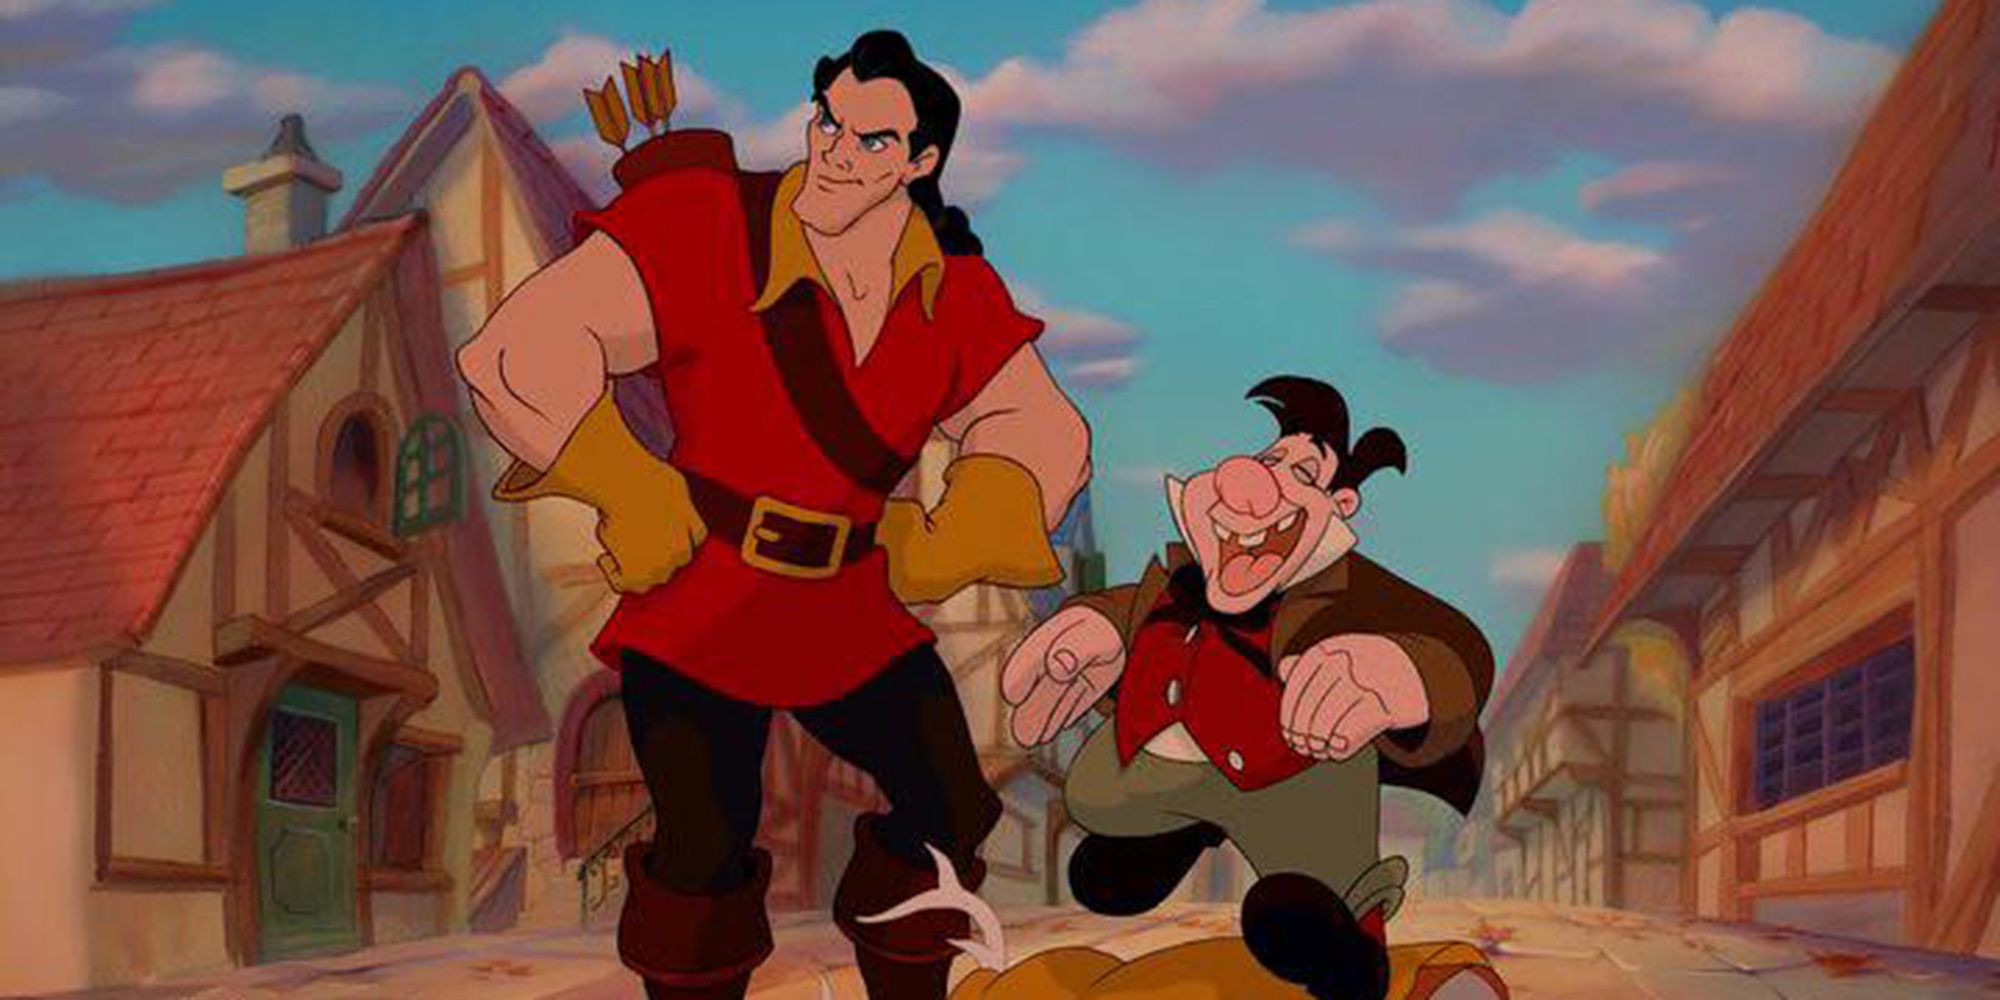 GASTON AND LEFOU IN BEAUTY AND THE BEAST